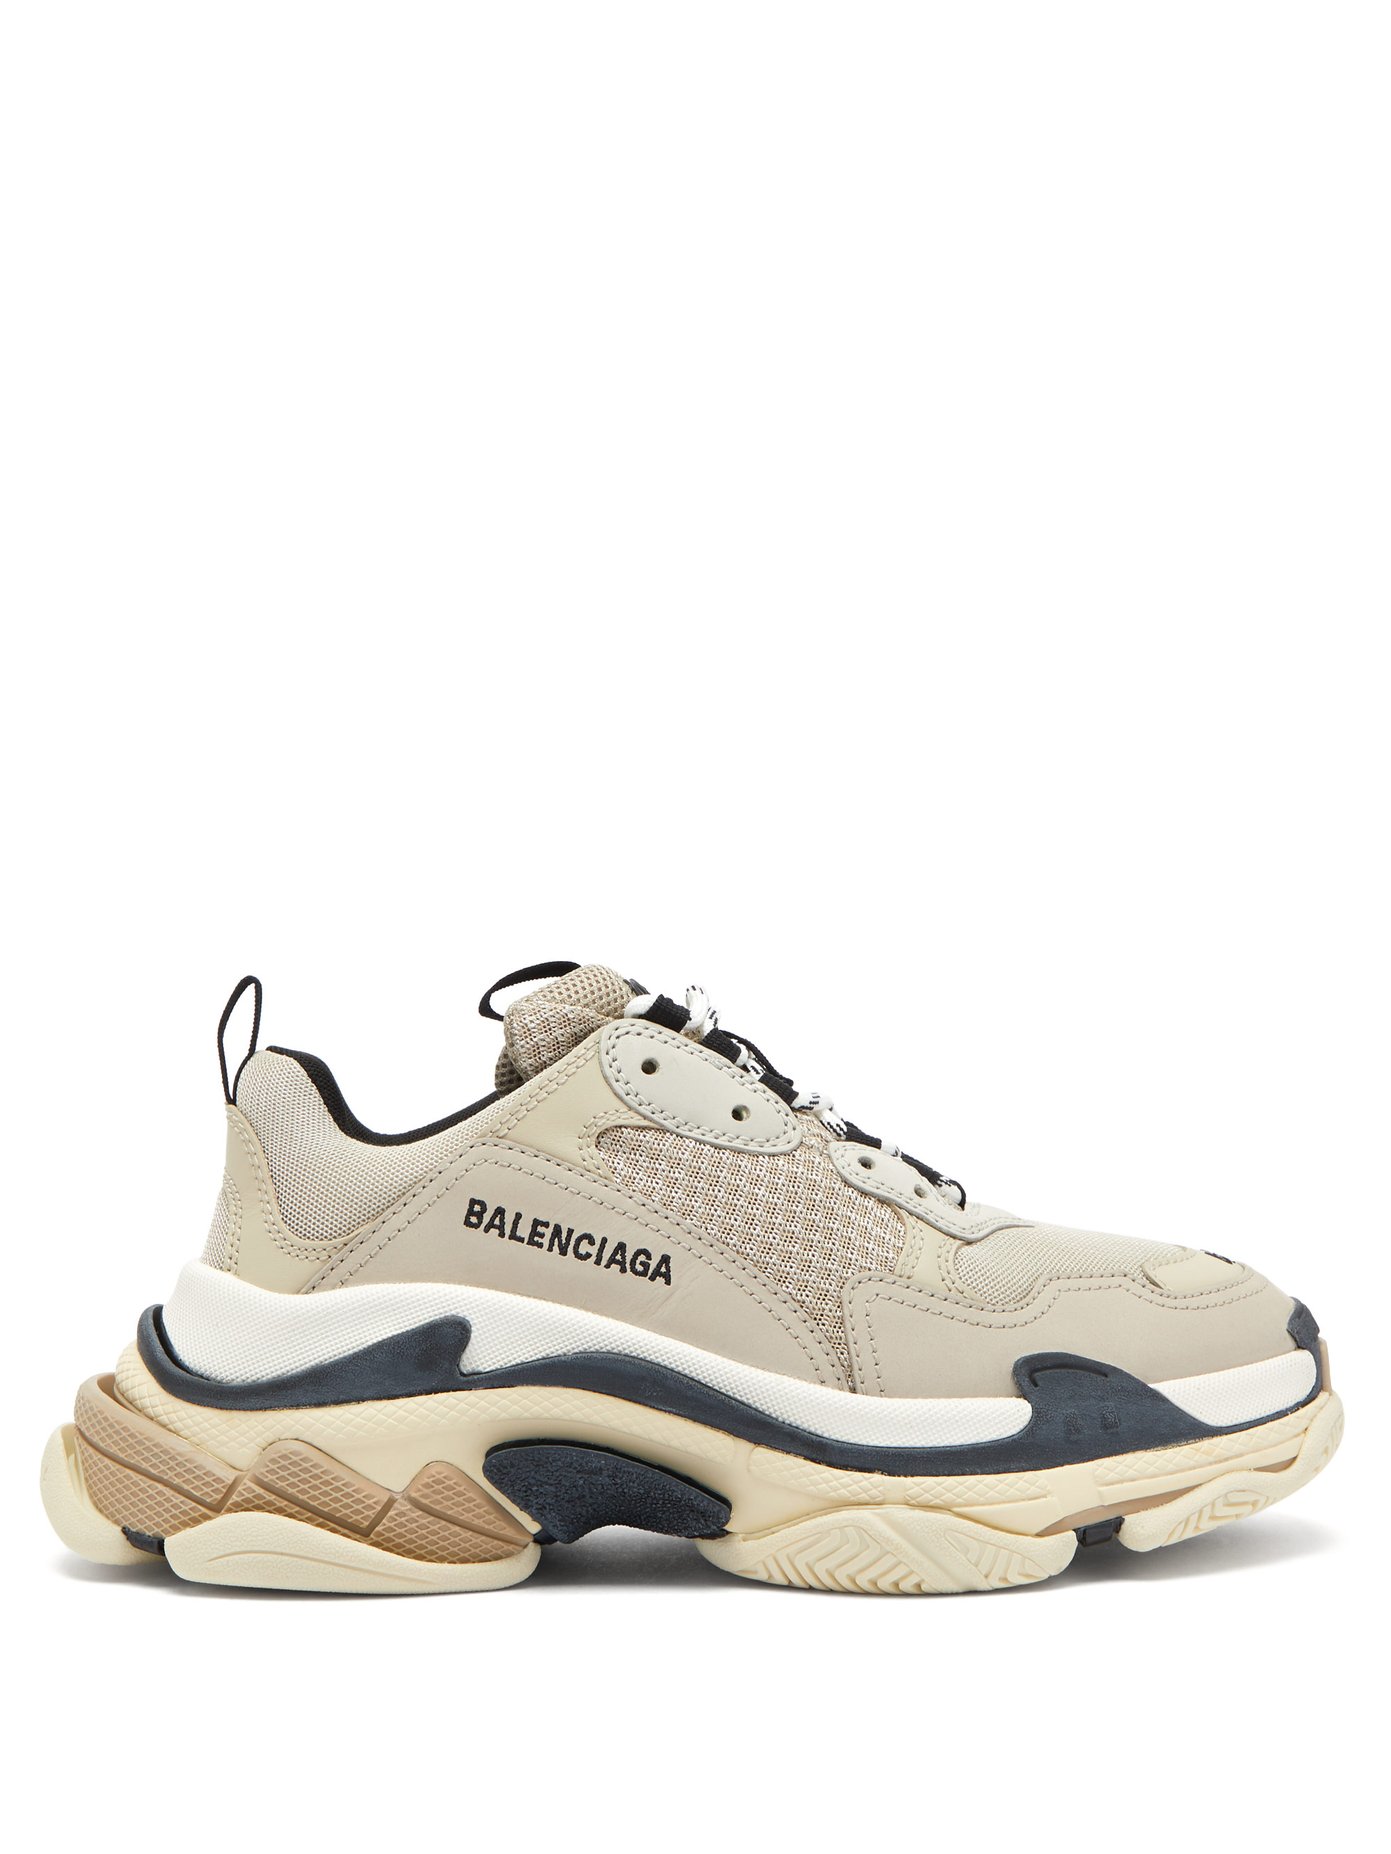 Balenciaga Triple S Runner Leather And Mesh Trainers in Navy